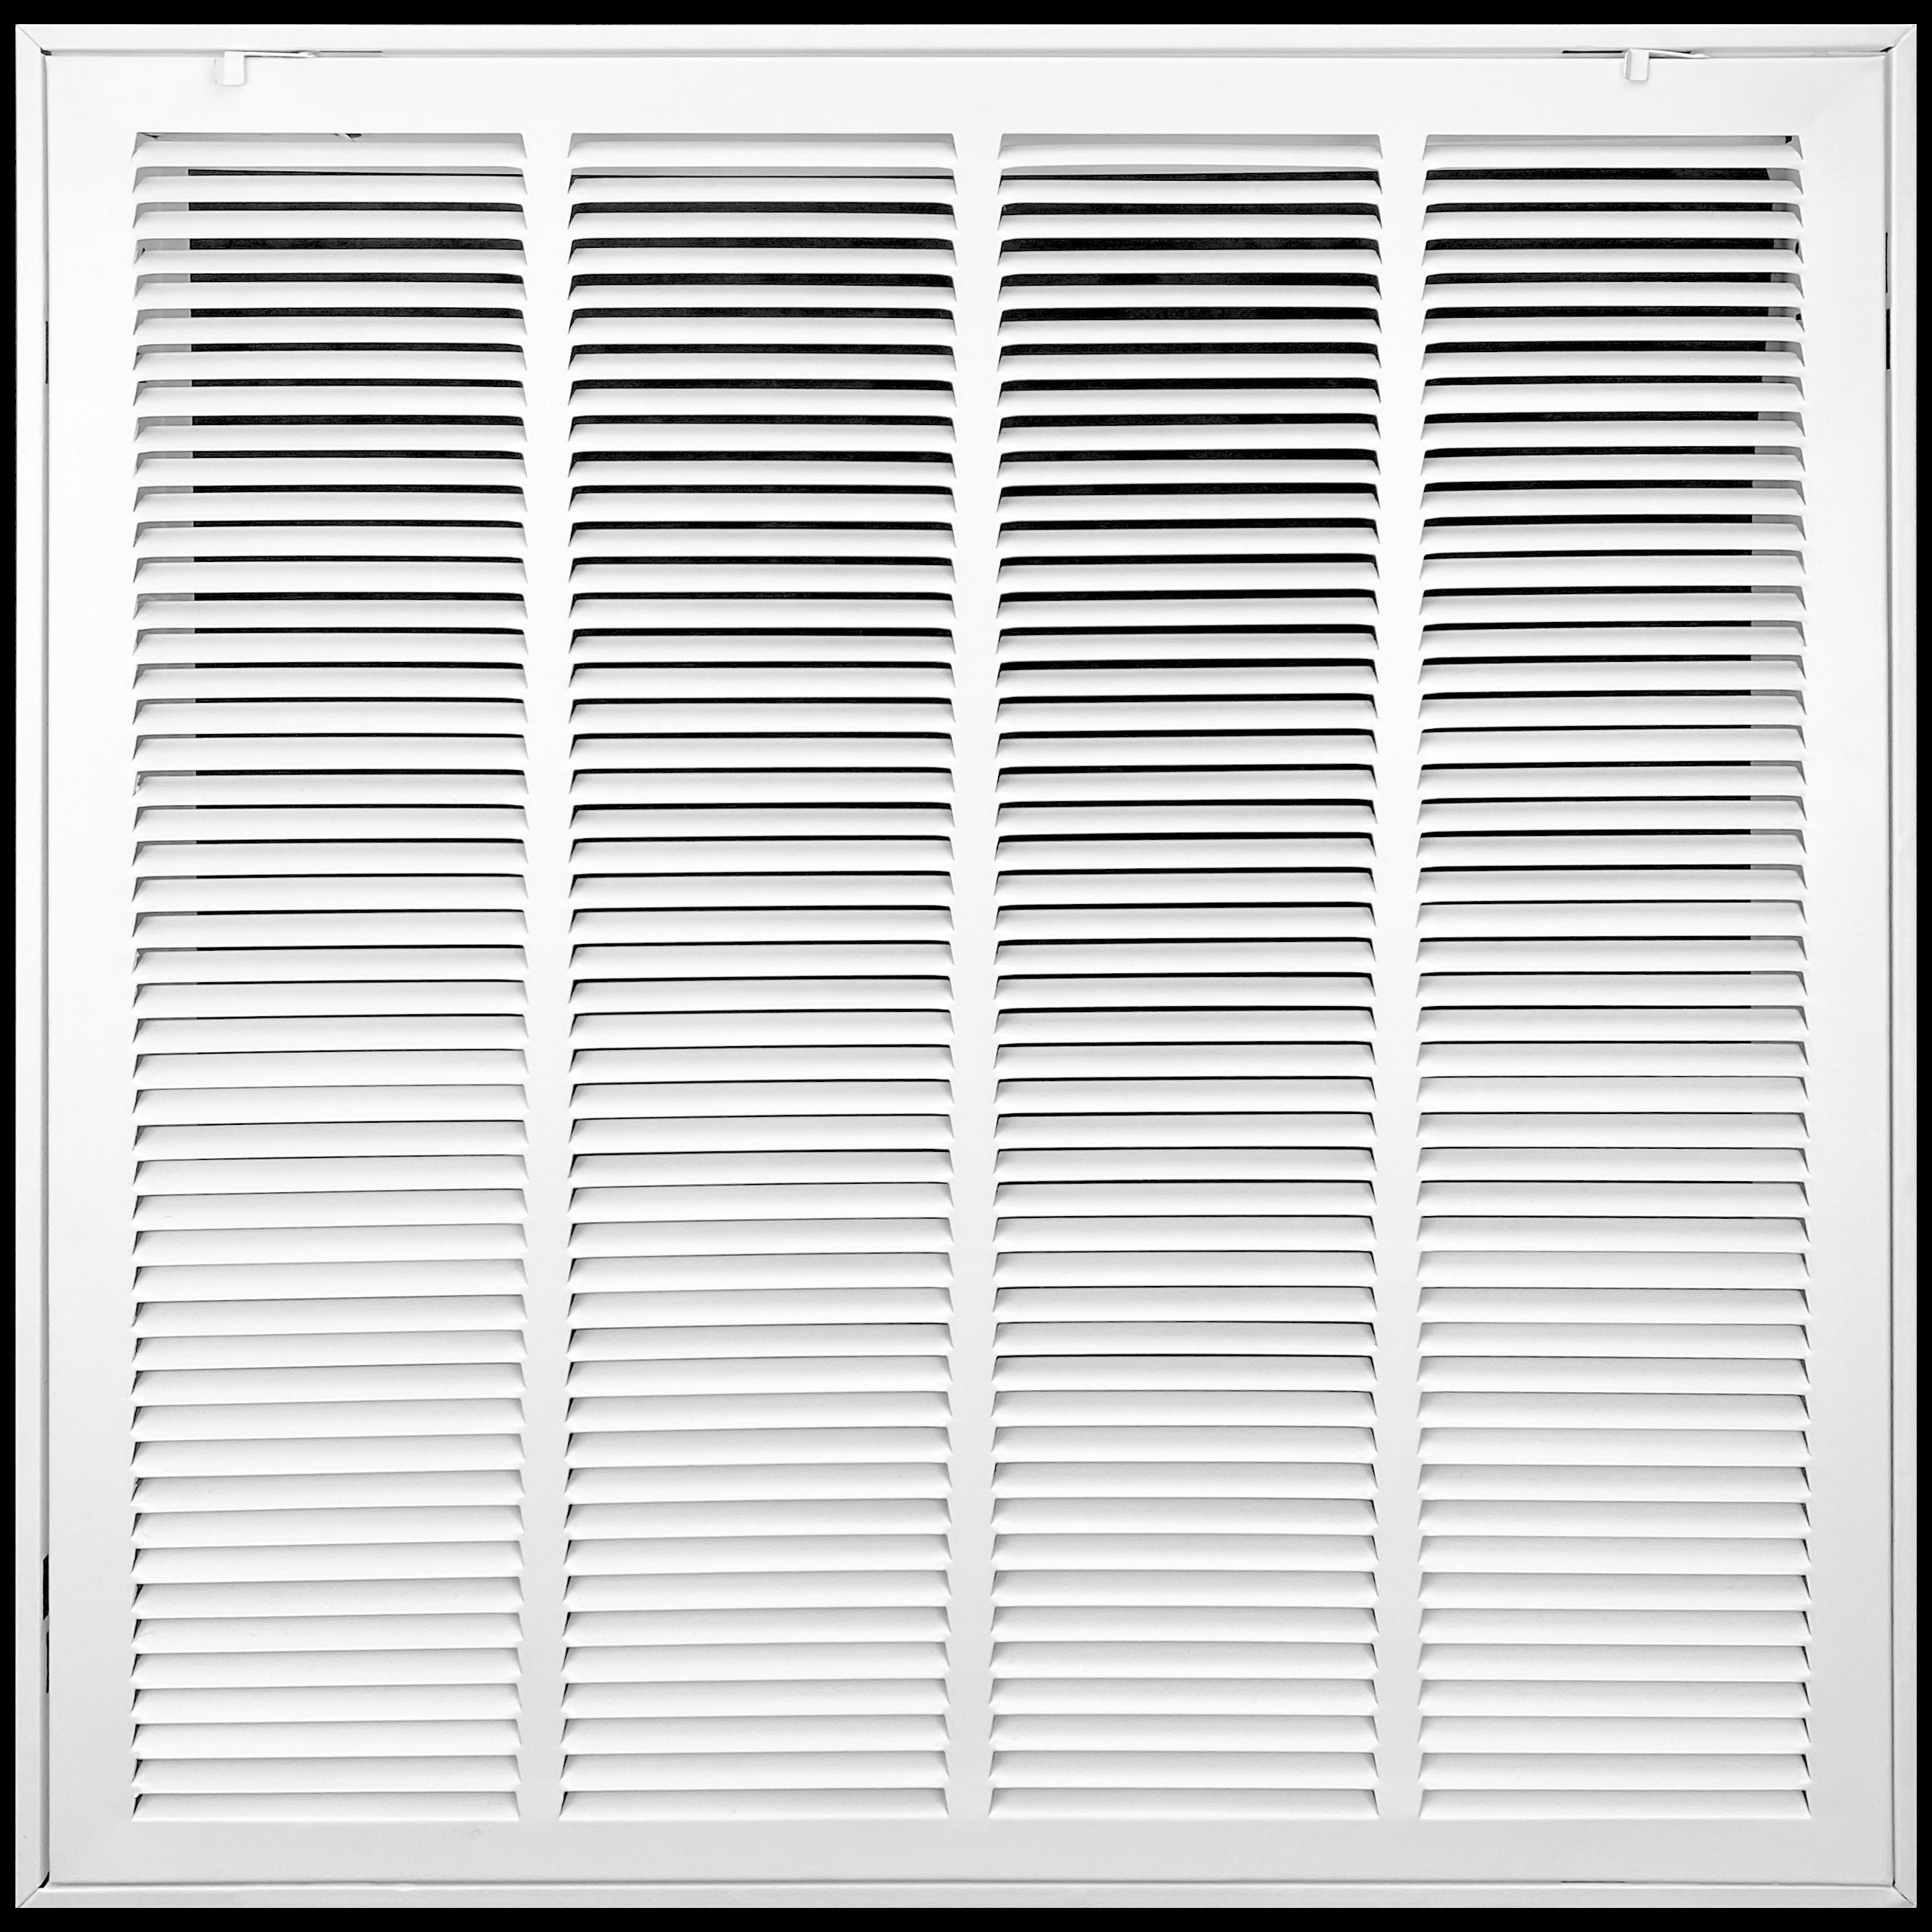 airgrilles 24" x 24" duct opening   hd steel return air filter grille for sidewall and ceiling  agc  7agc-1raf-wh-24x24 756014649505 - 1